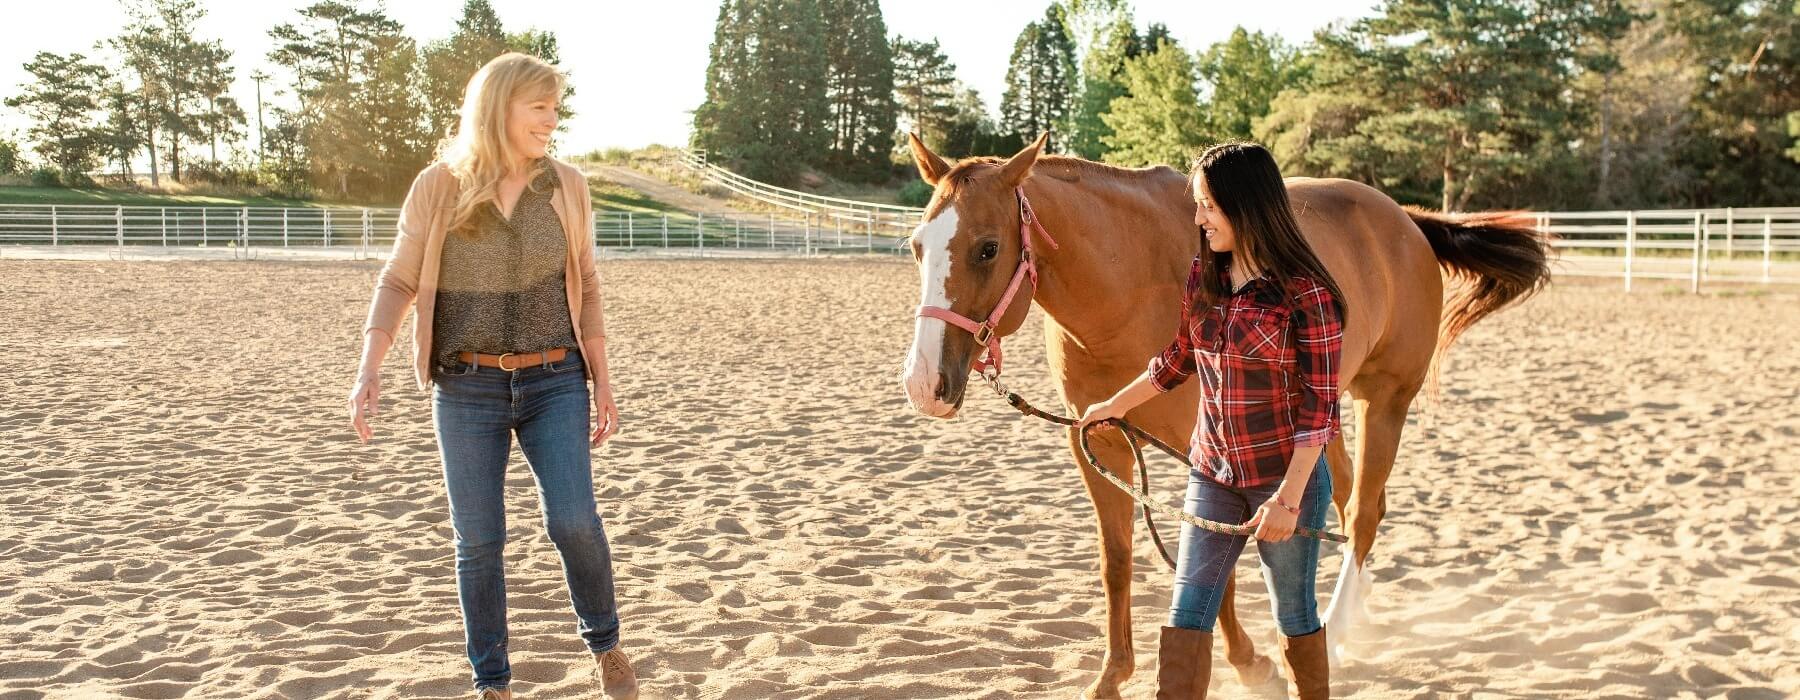 teen girl in equine therapy session